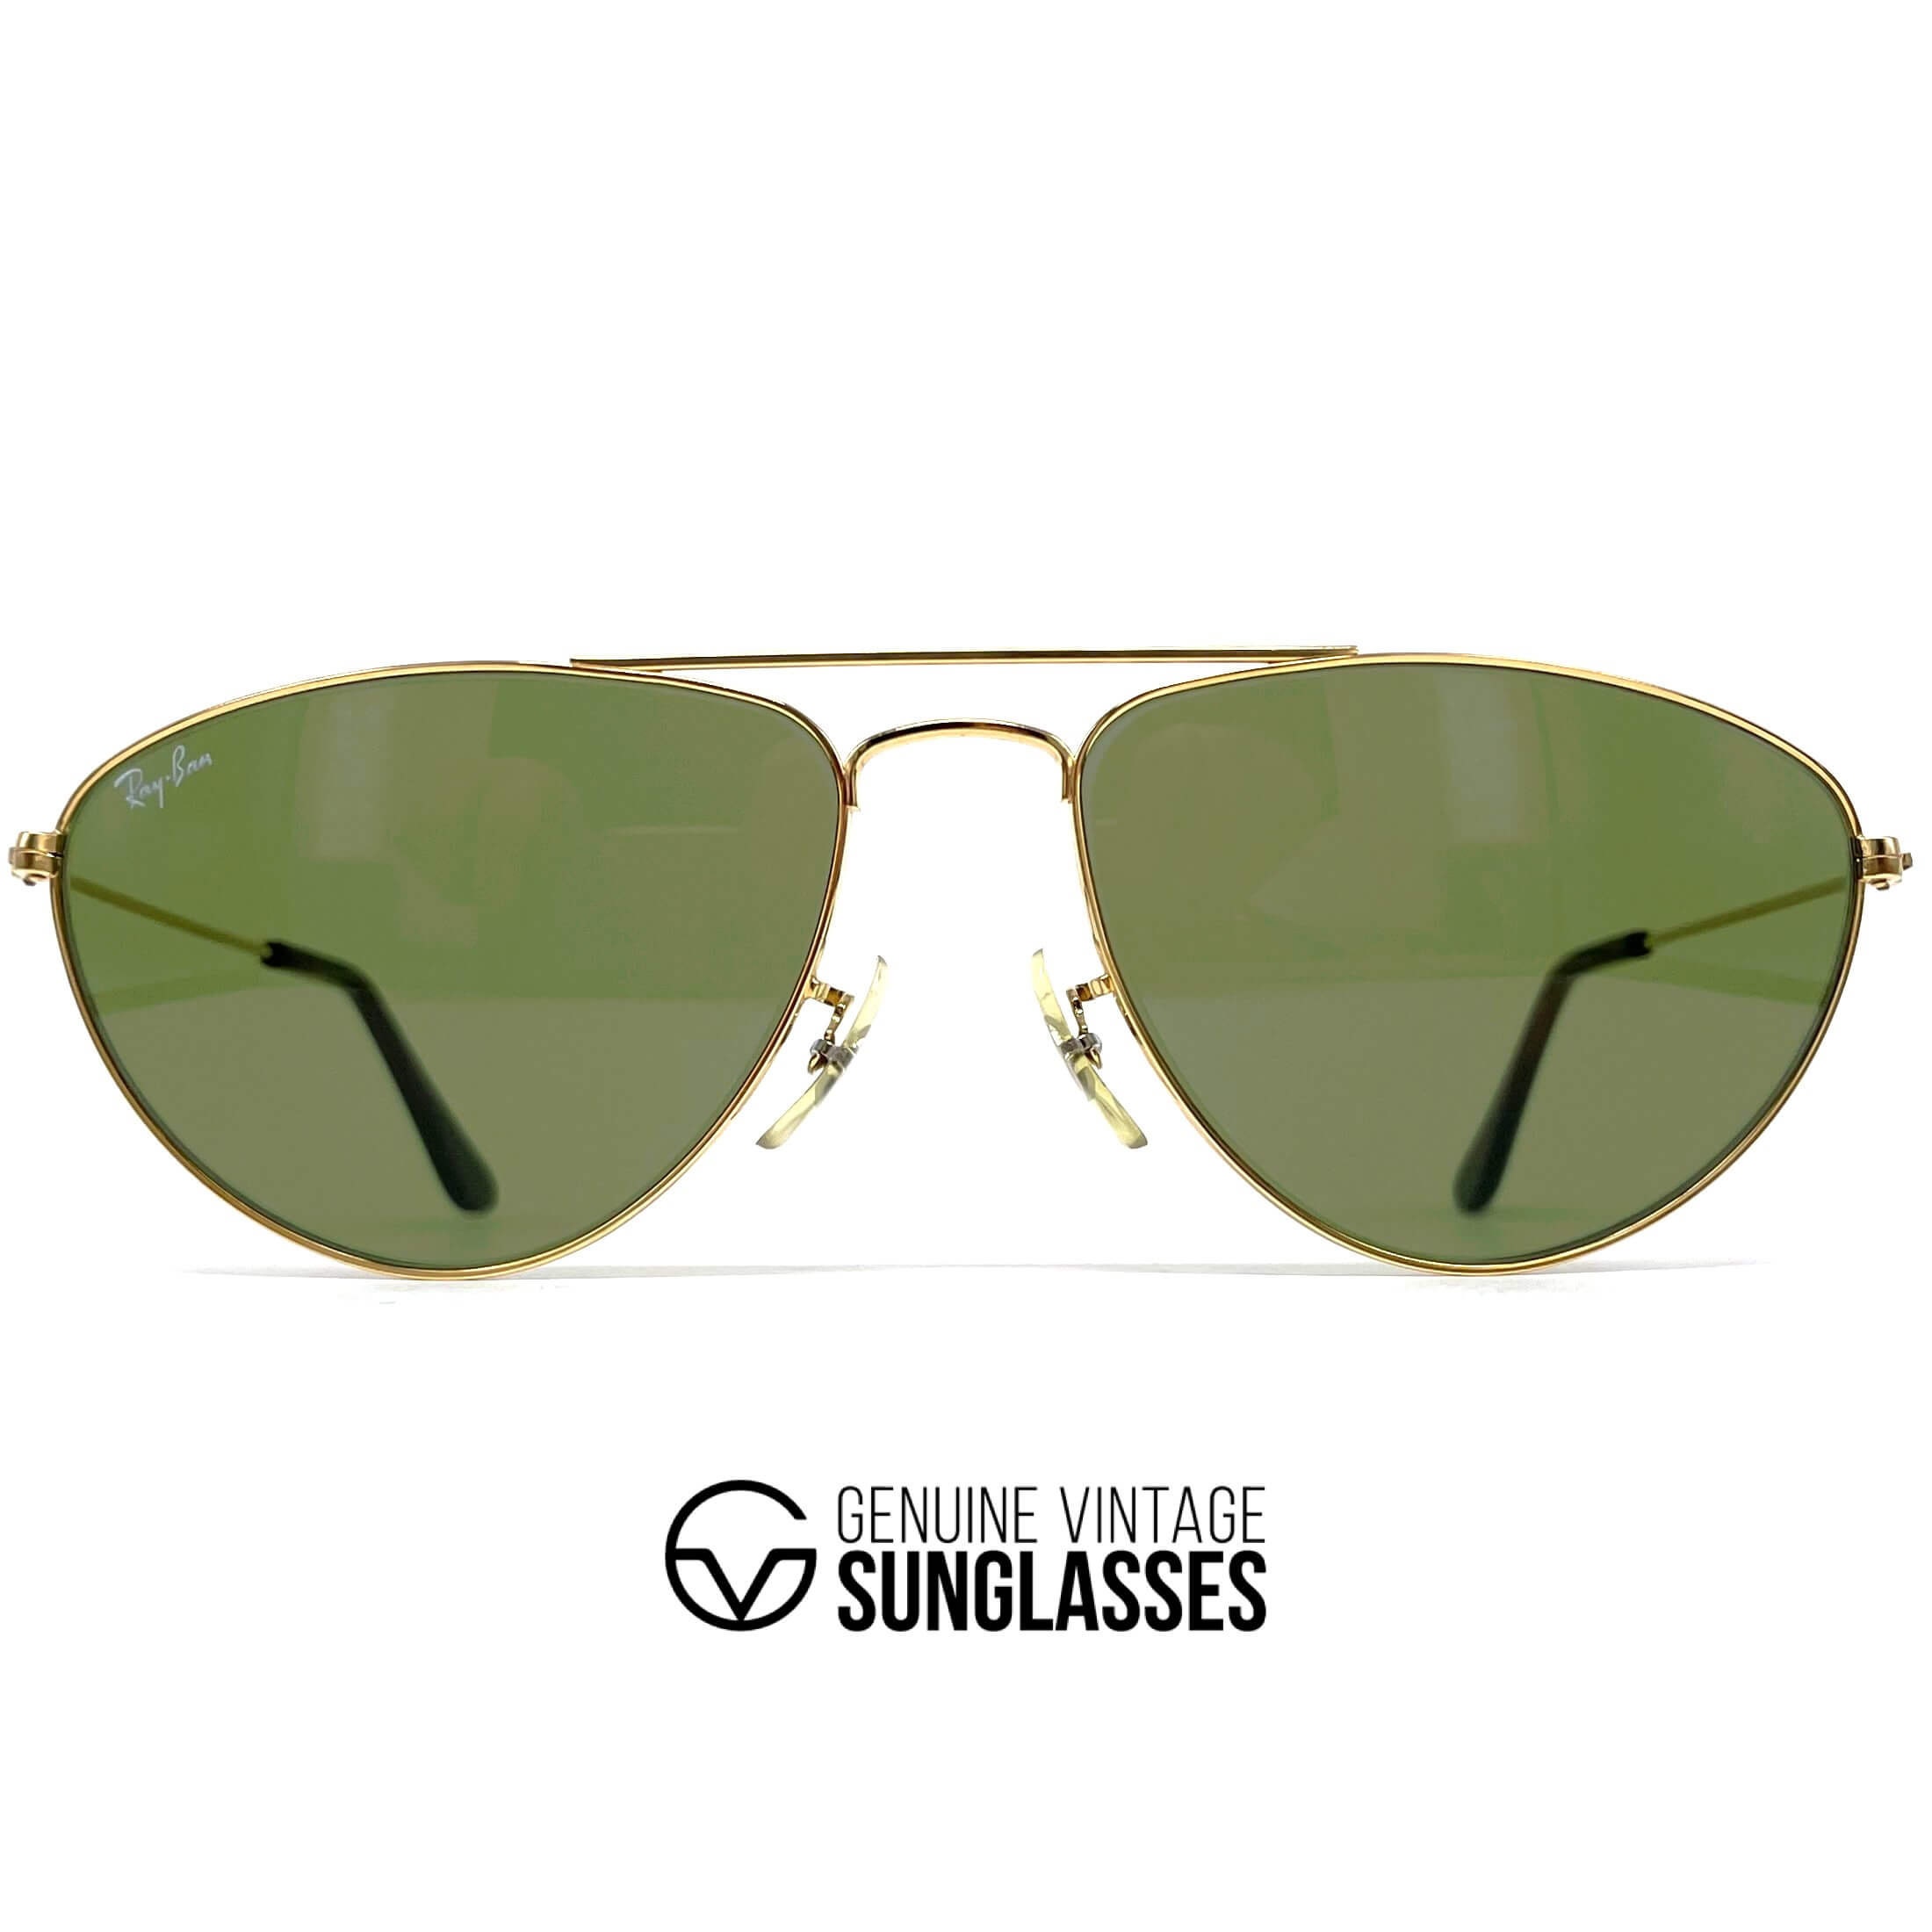 Ray Ban B&L Oval W0976 Gold/green Vintage Bausch Lomb Sunglasses USA - Etsy